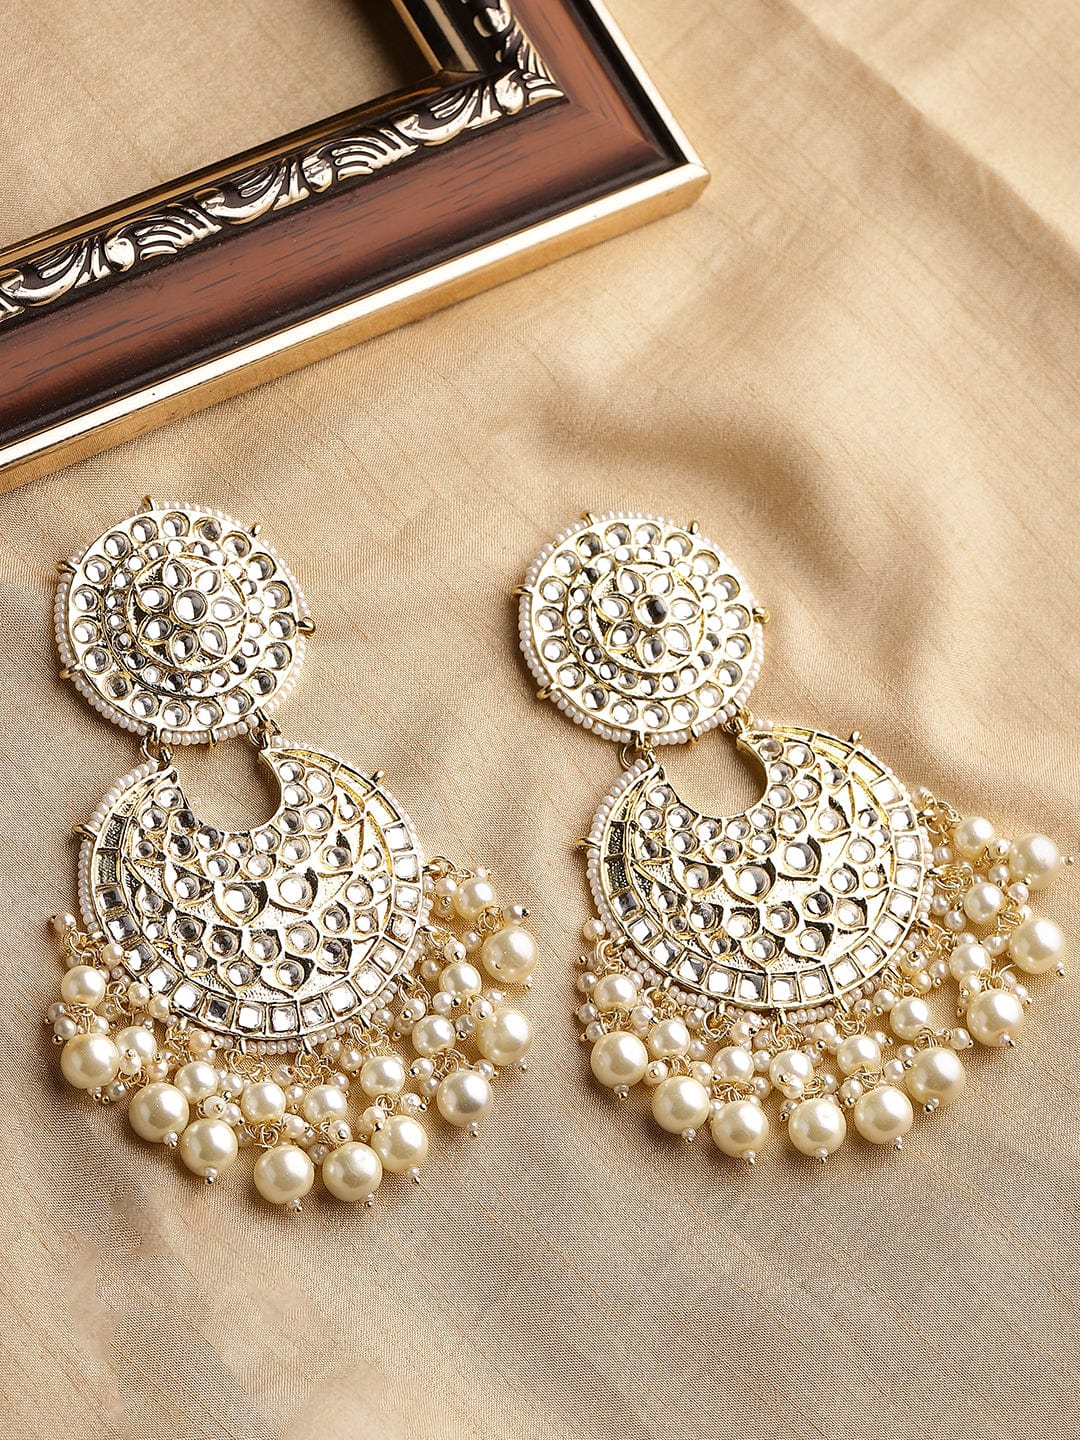 Luxury White Crystal Indian Earrings Jewelry Female Vintage Gold Color  Wedding Jewelry Beads Tassel Retro Palace Earrings